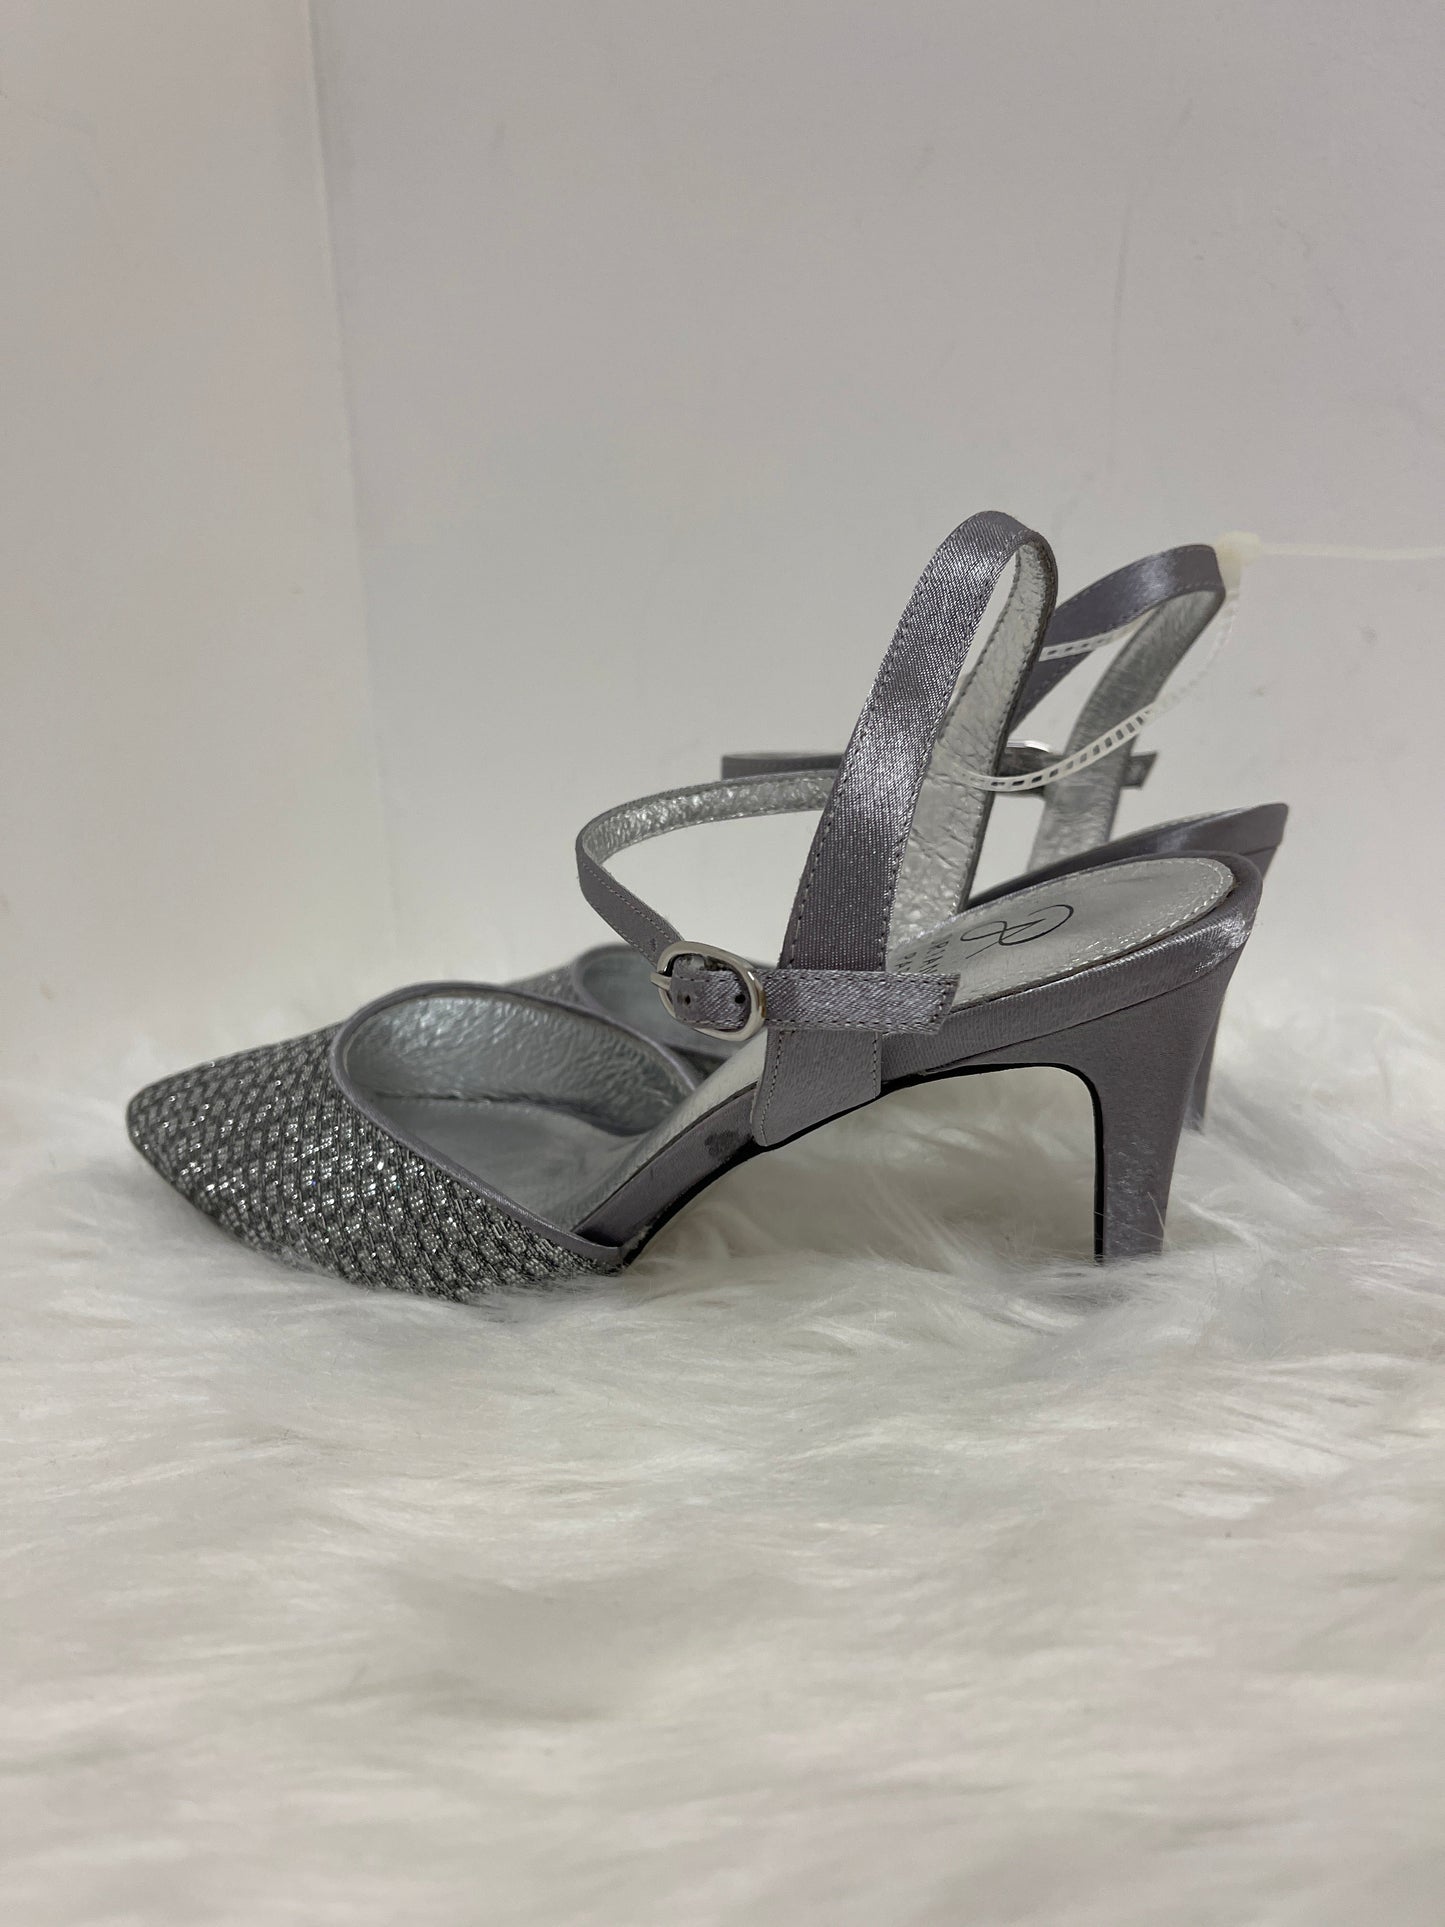 Shoes Heels Stiletto By Adrianna Papell  Size: 7